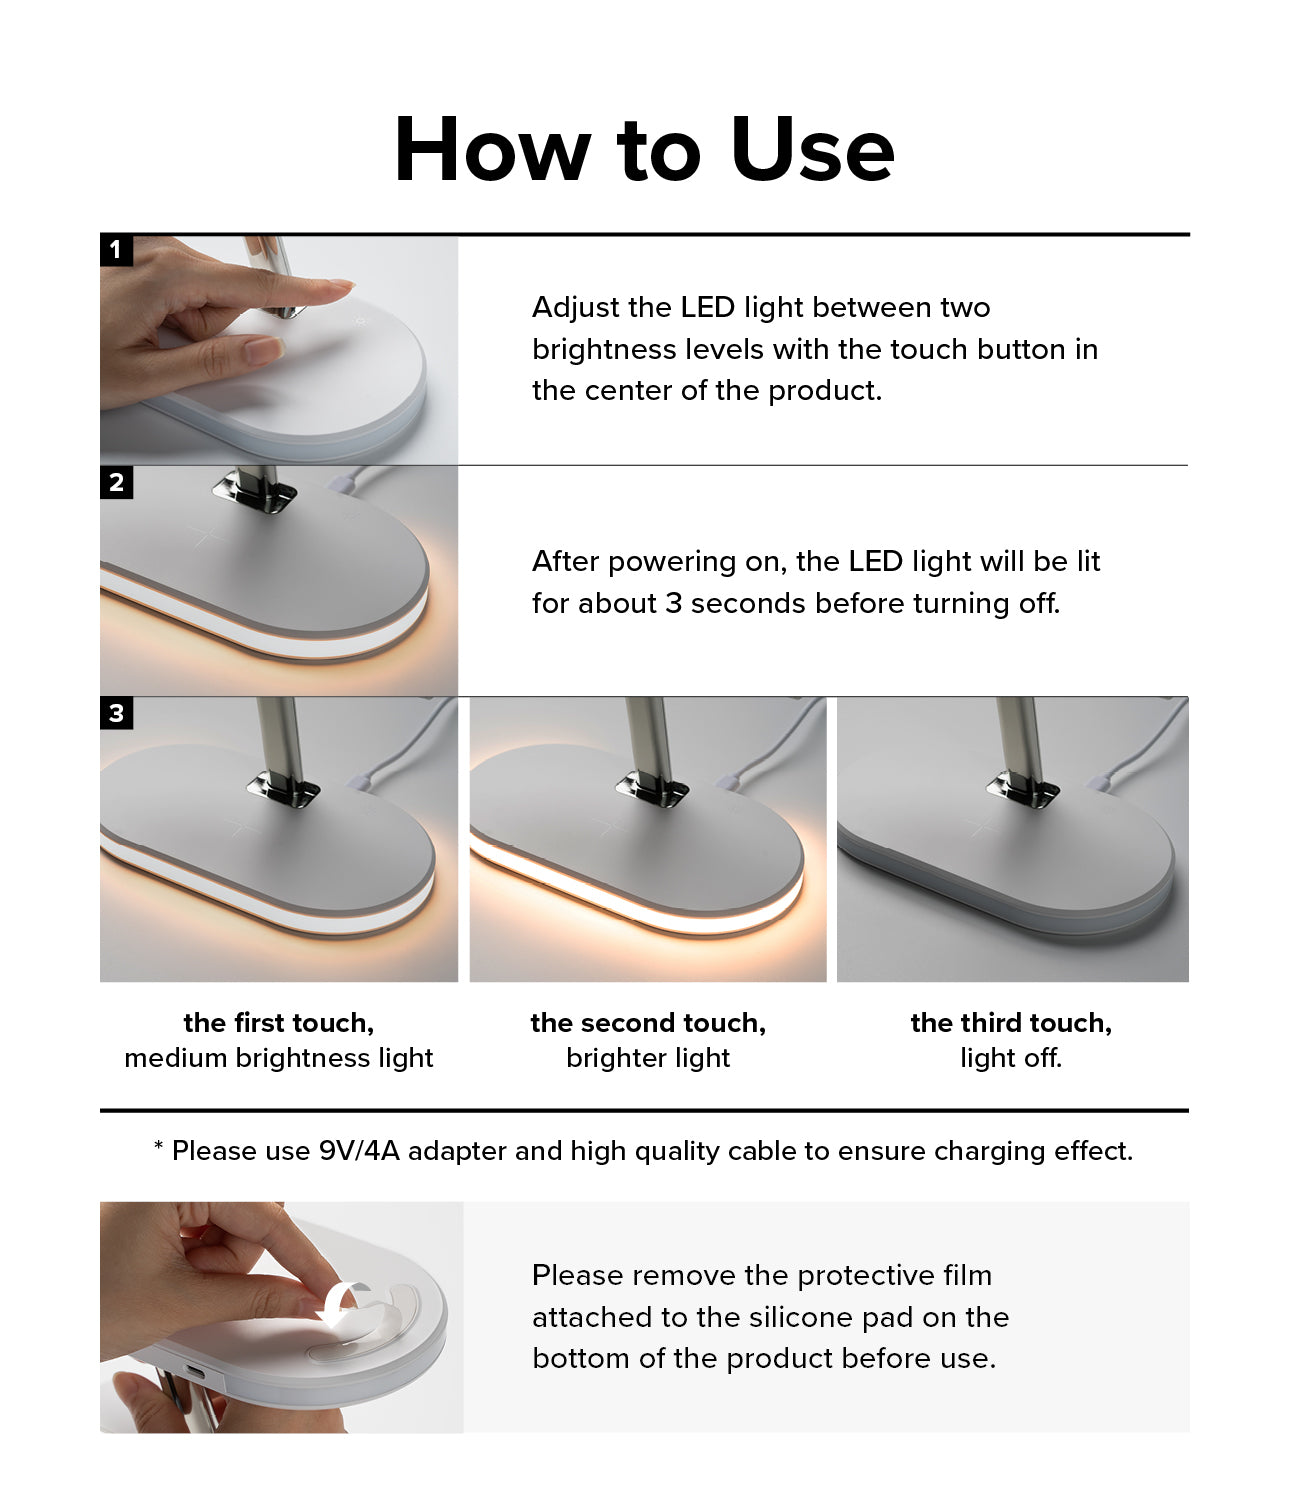 Ringke 3-in-1 Wireless Charger Stand - How to Use. Adjust the LED light between two brightness levels with the touch button in the center of the product. After powering on, the LED light will be lit for about 3 seconds before turning off. Please use 9V/4A adapter and high quality cable to ensure charging effect. 